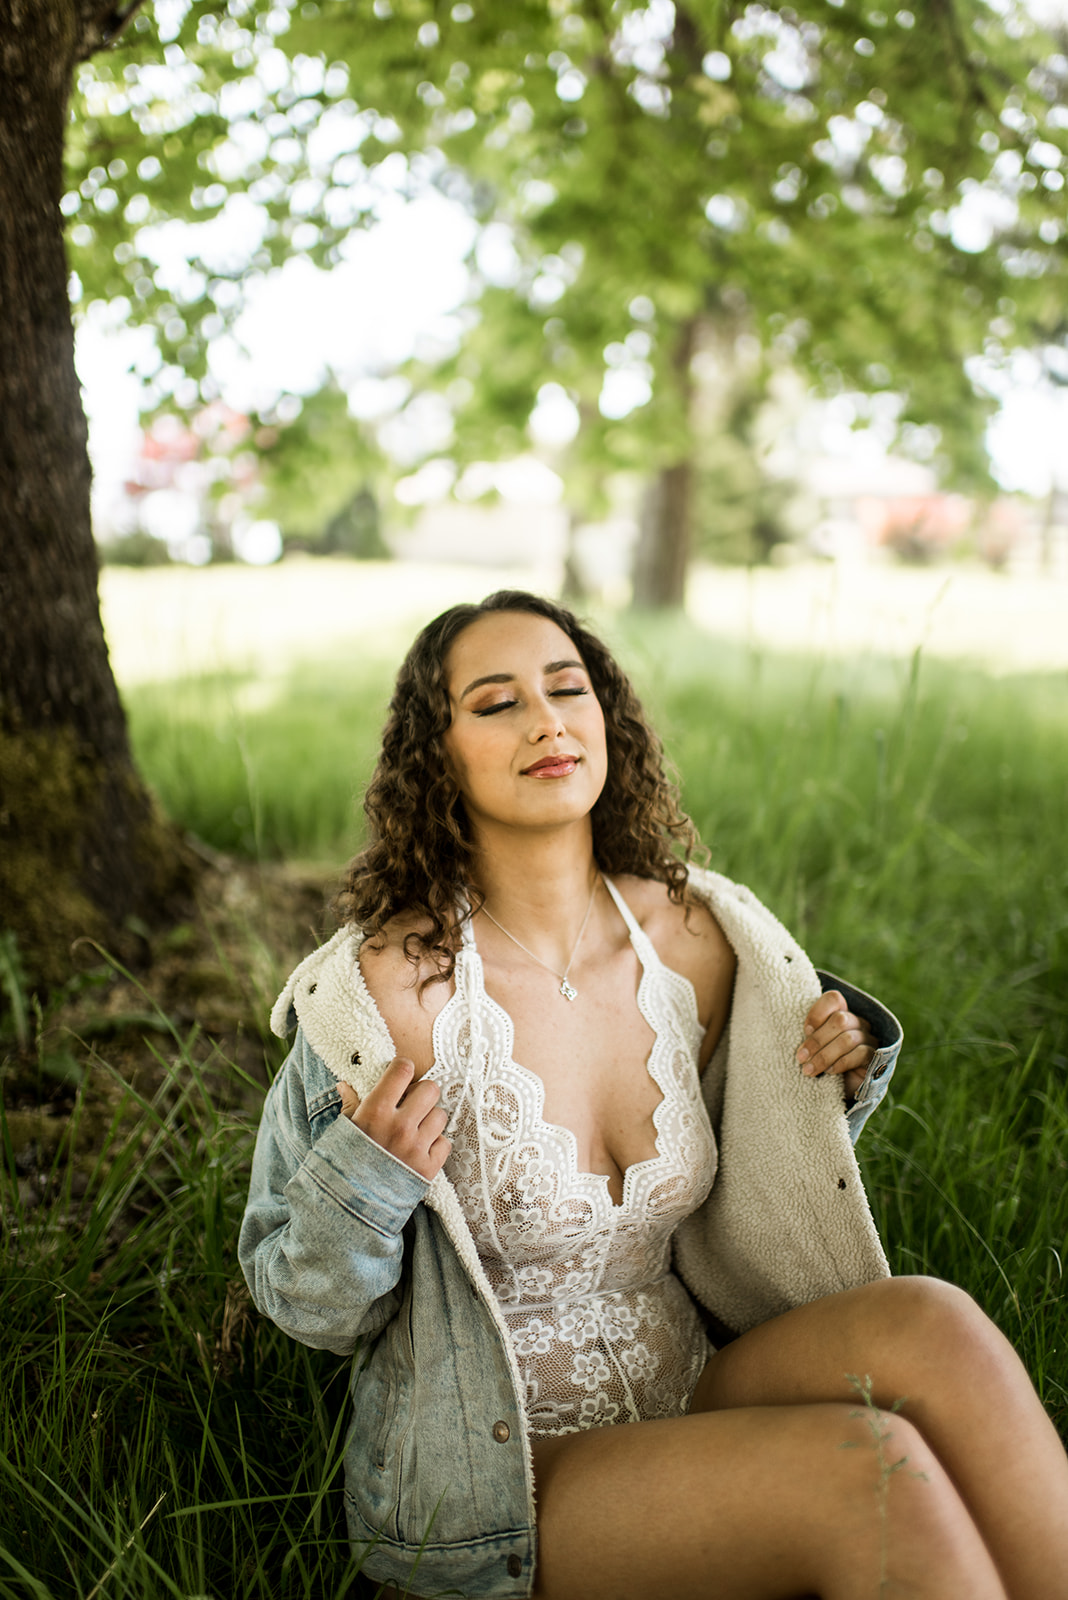 woman with curly hair wears a jean jacket and white lingerie while sitting under a tree for her boudoir session outdoors